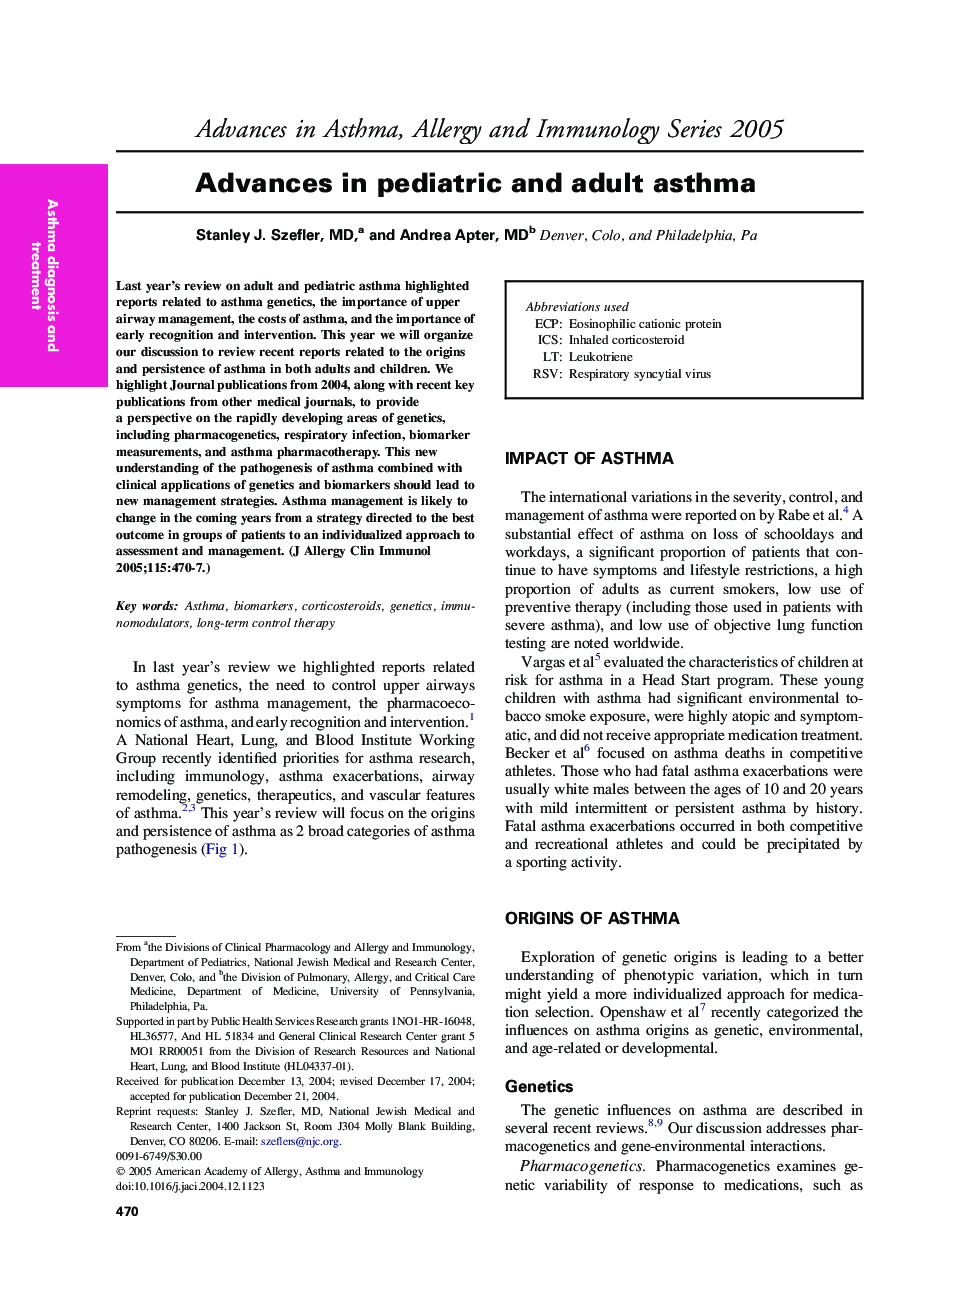 Advances in pediatric and adult asthma